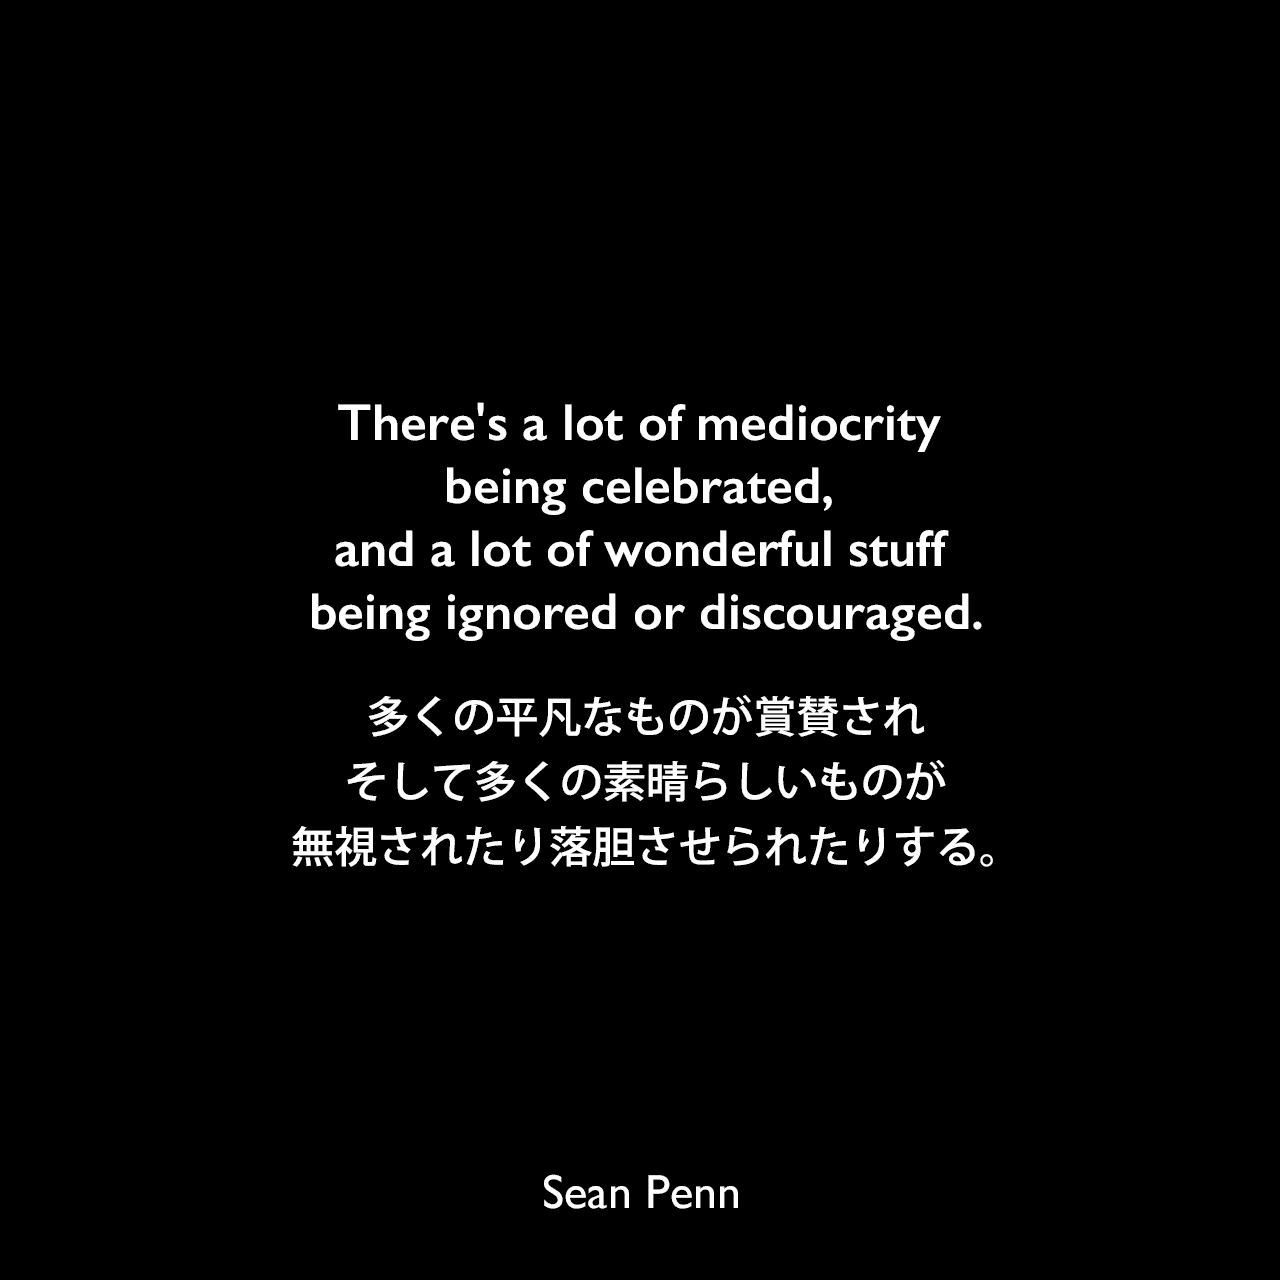 There's a lot of mediocrity being celebrated, and a lot of wonderful stuff being ignored or discouraged.多くの平凡なものが賞賛され、そして多くの素晴らしいものが無視されたり落胆させられたりする。Sean Penn